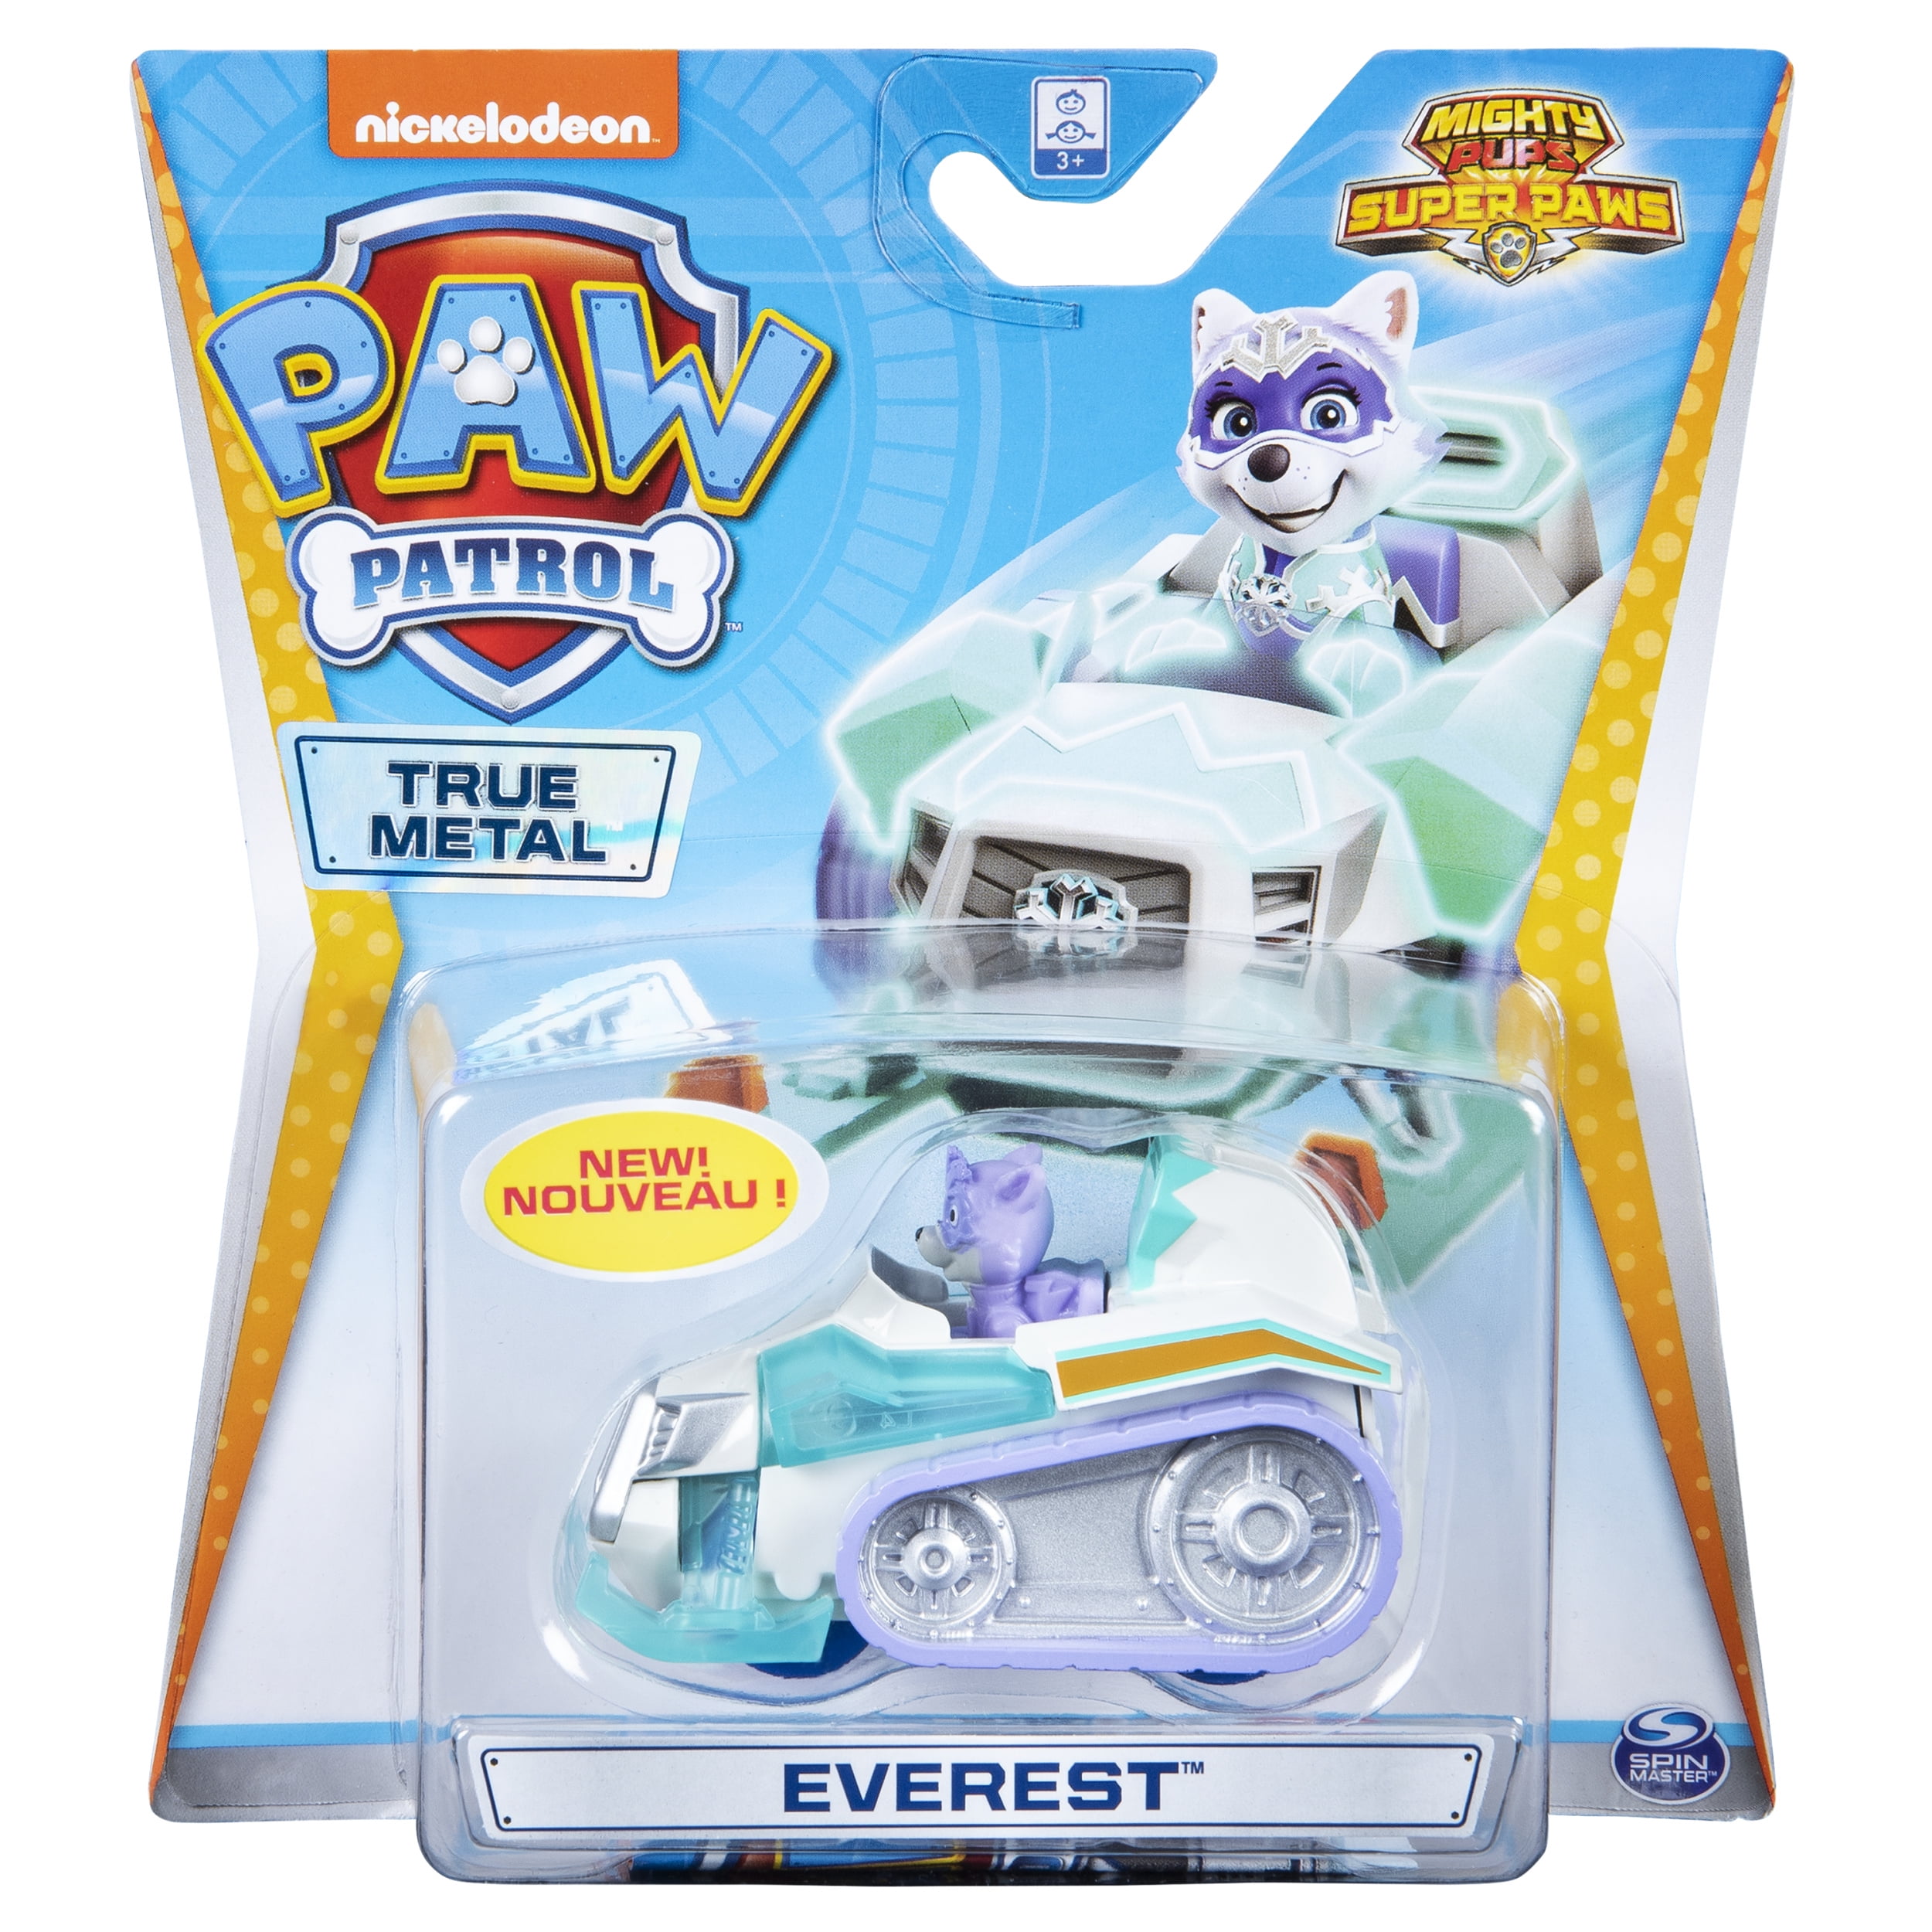 fætter Kaptajn brie klog PAW Patrol, True Metal Mighty Everest Super PAWs Collectible Die-Cast  Vehicle, Classic Series 1:55 Scale - Walmart.com